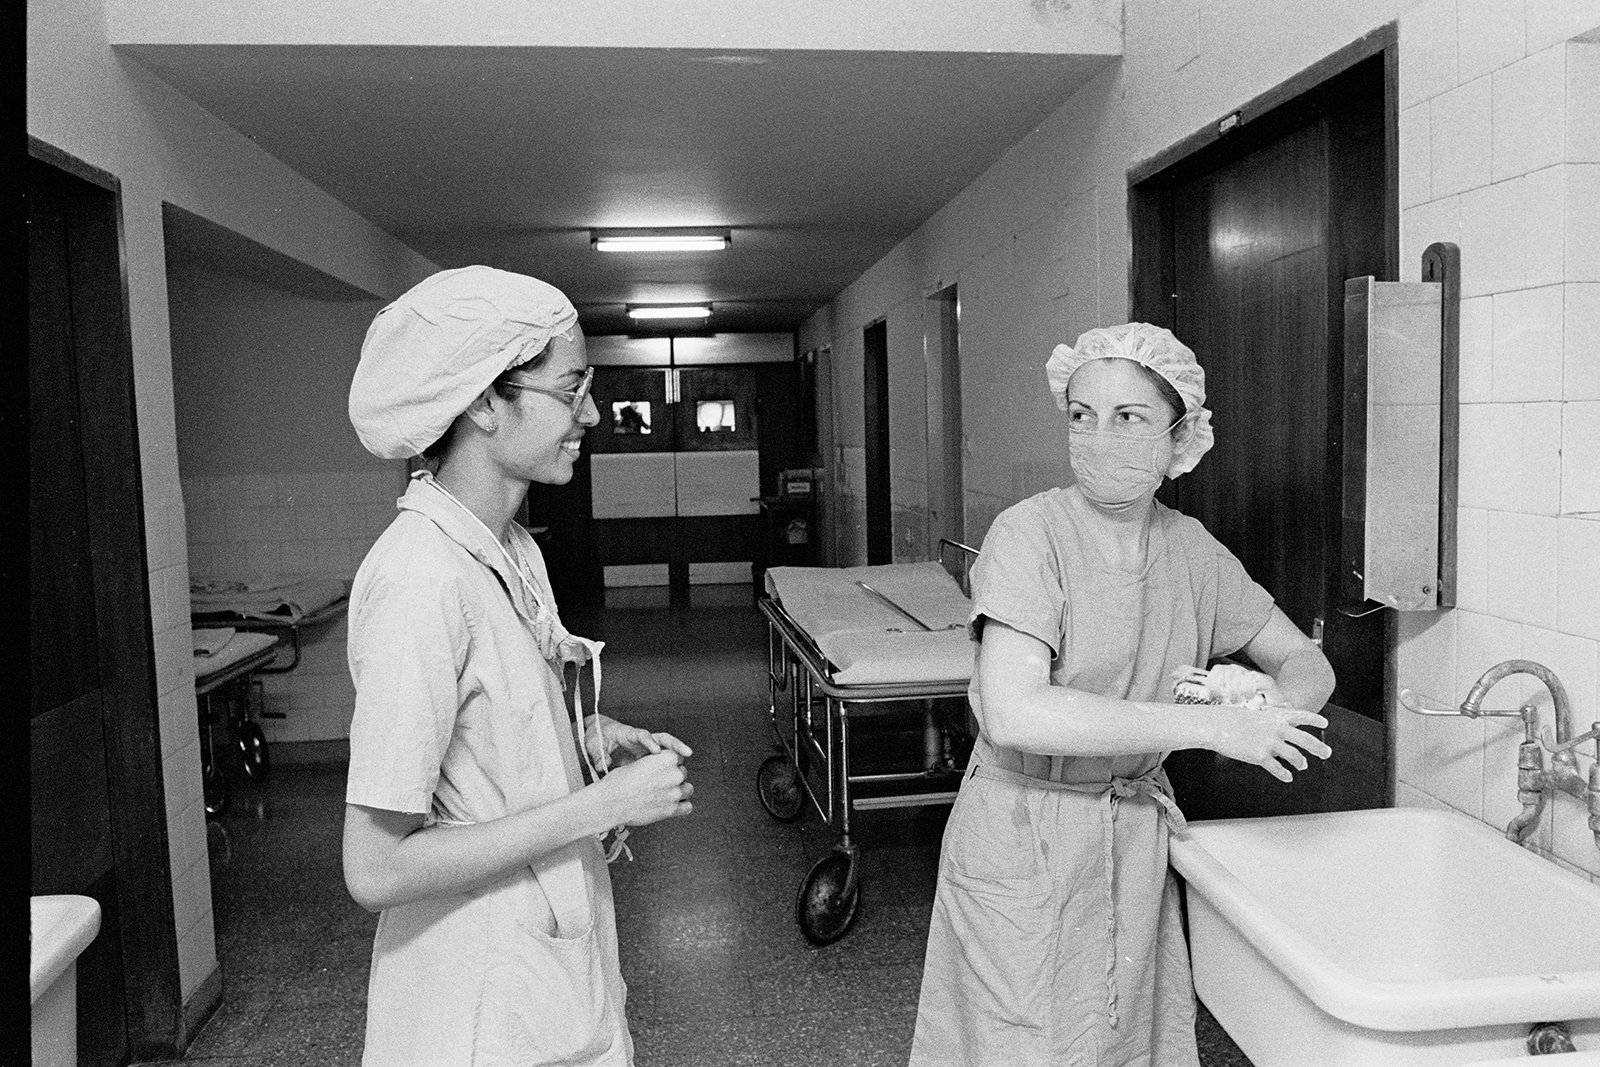 Dr. Rebekah Naylor scrubs her hands before walking into the operating room for surgery in 1990 in Bangalore, India. (© IMB Archive Photo, 1990)